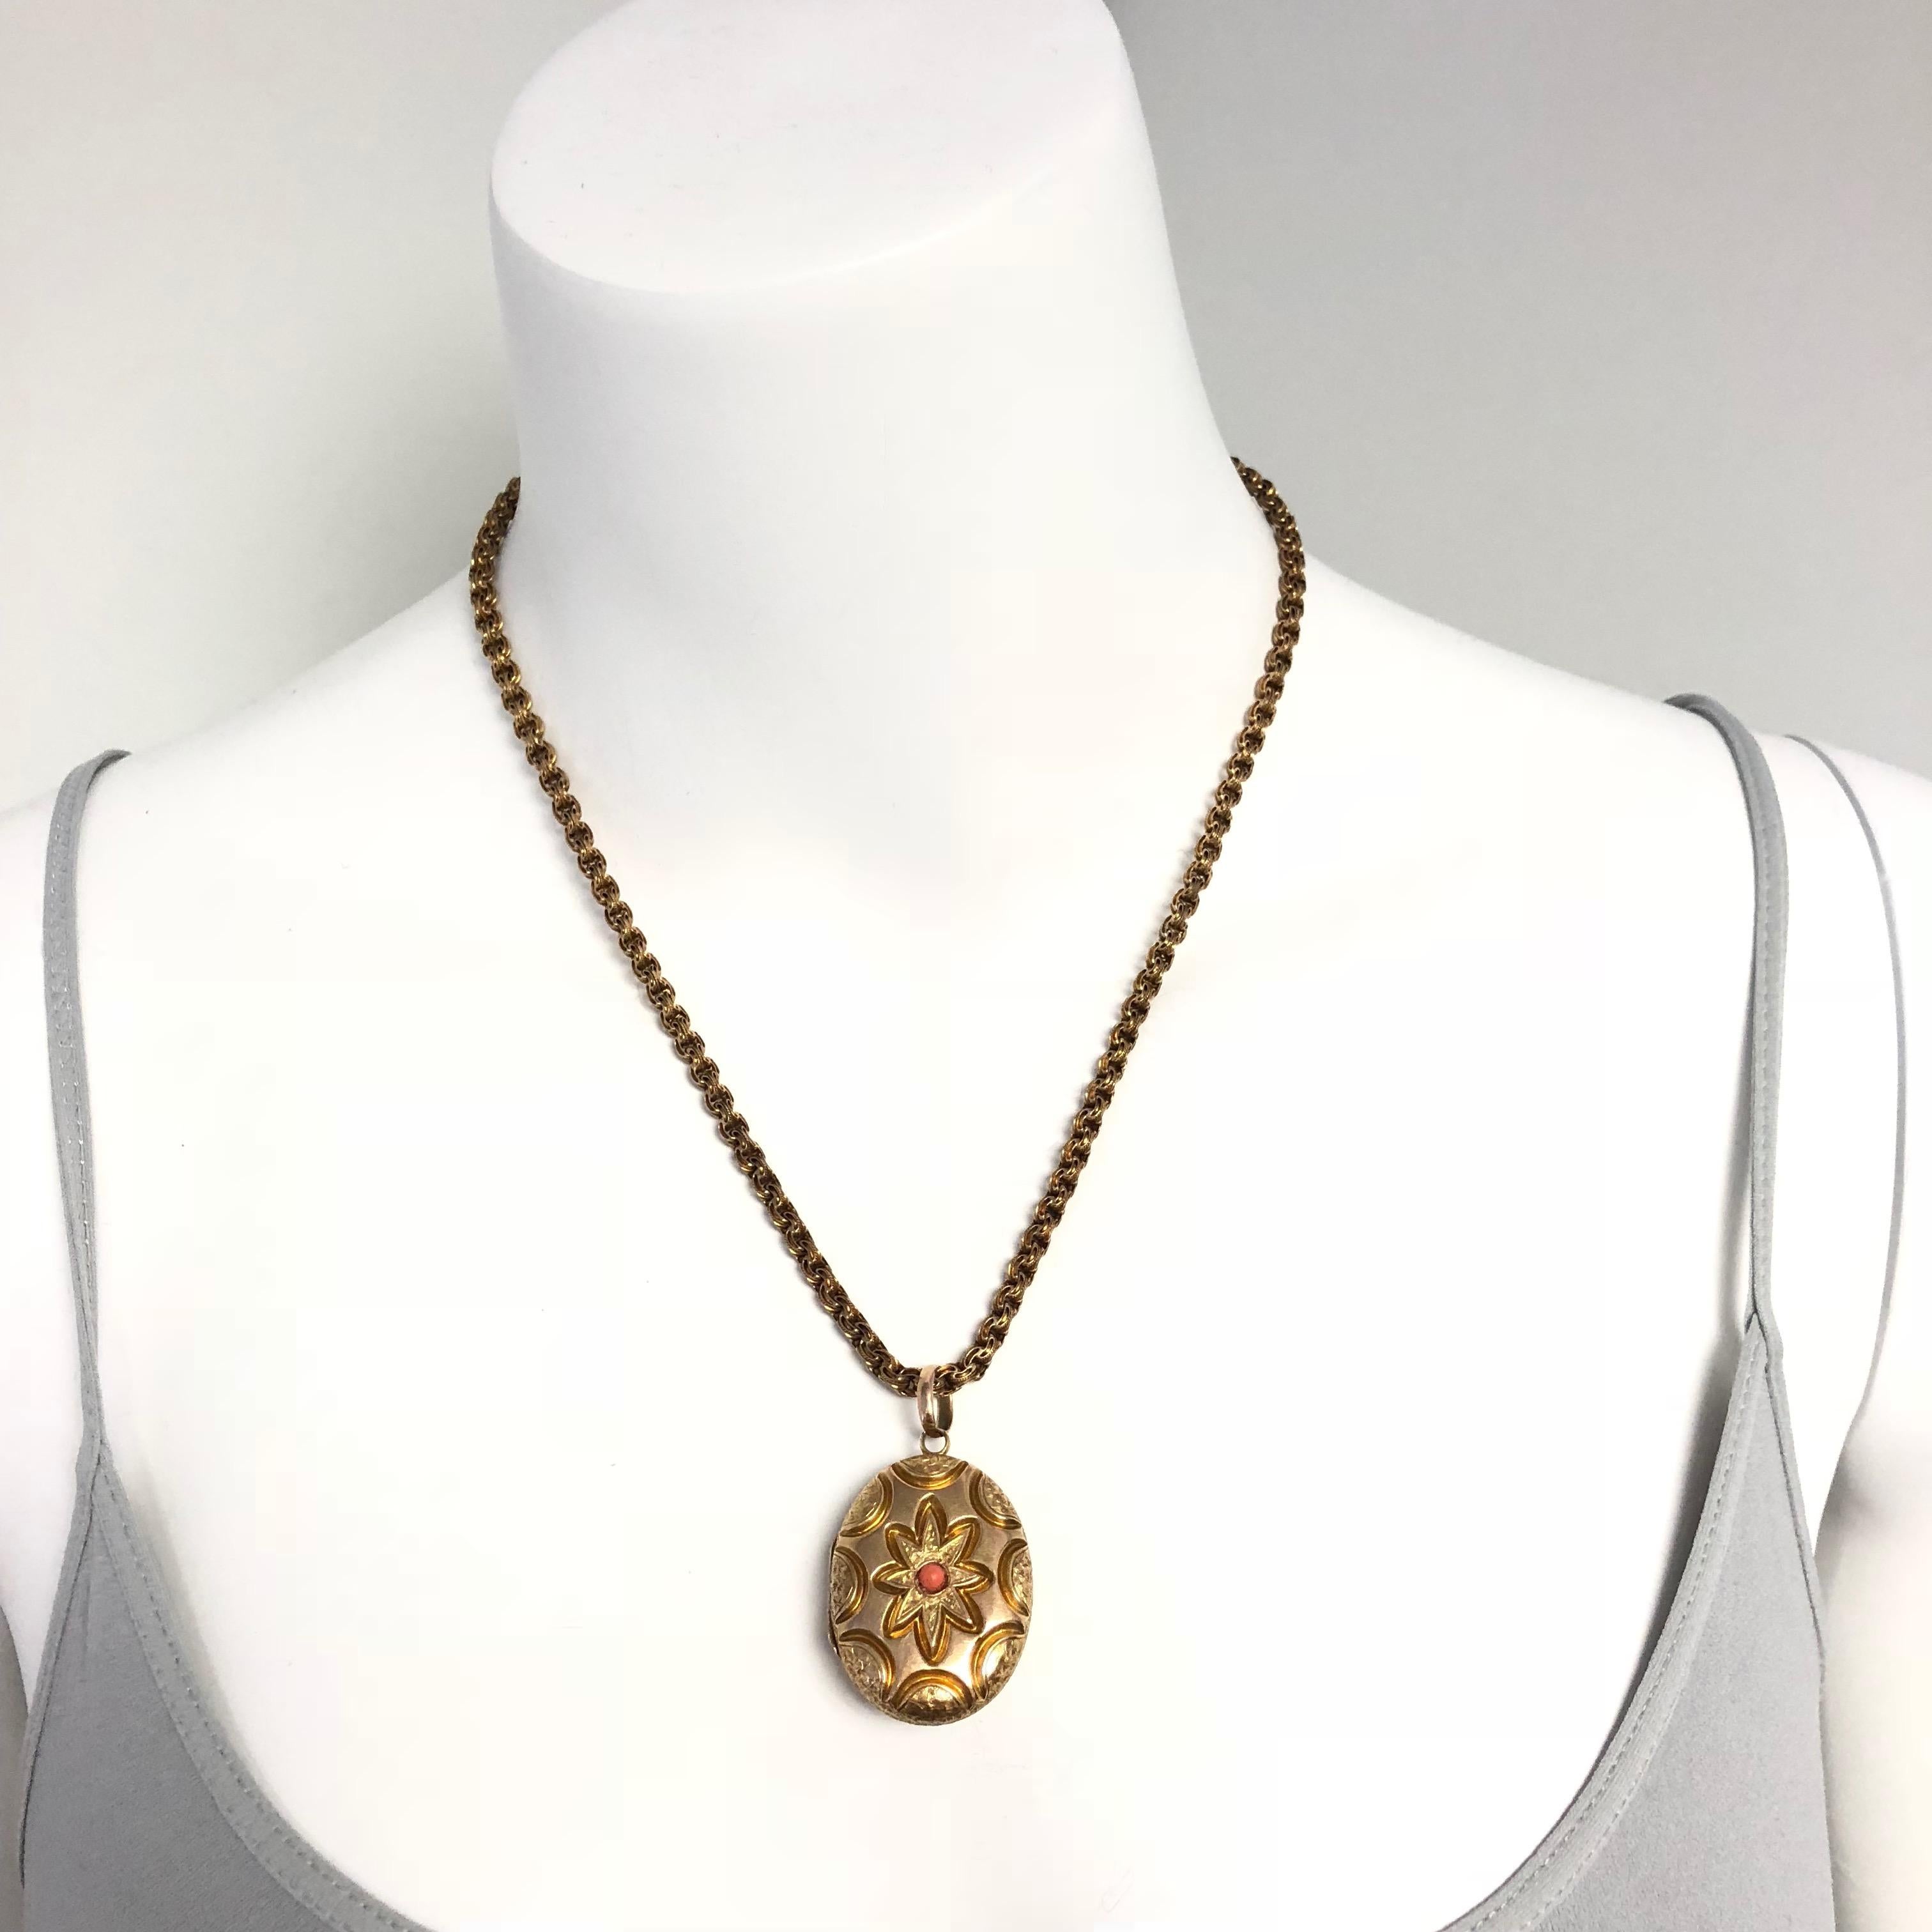 Women's or Men's Victorian Coral and Gold Locket Pendant Necklace